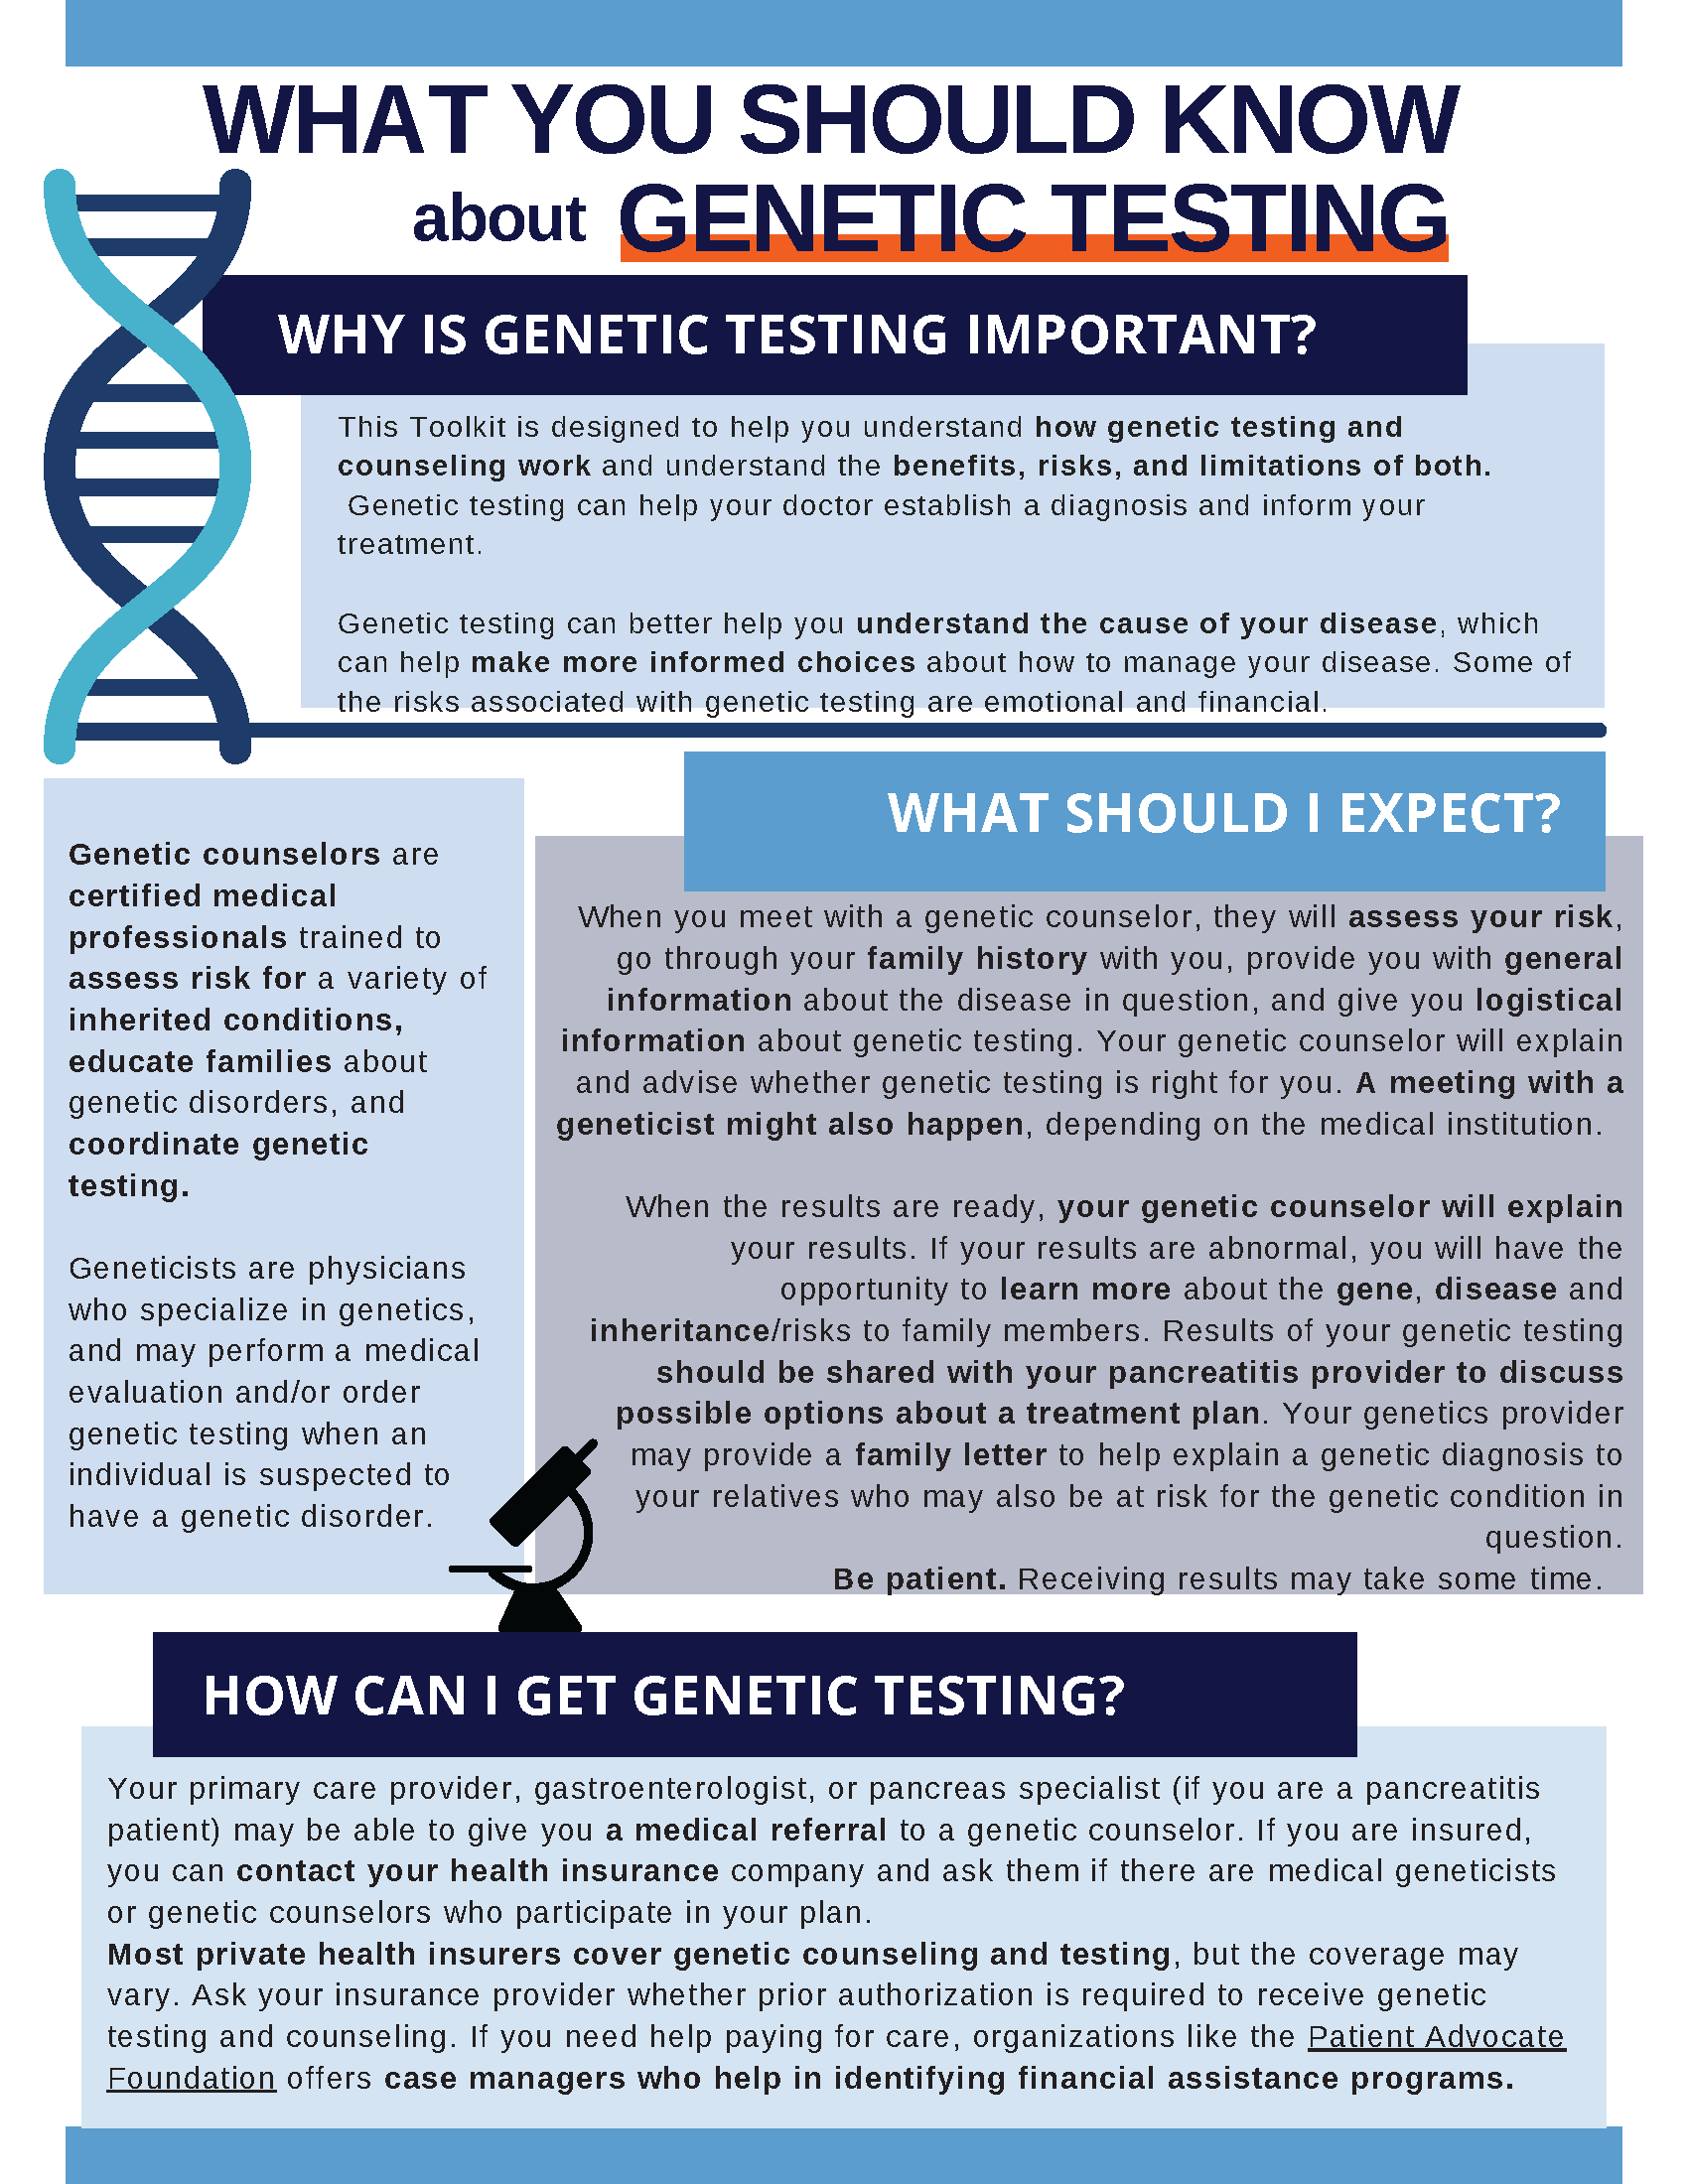 What-You-Should-Know-About-Genetic-Testing-for-Pancreatitis_Page_1